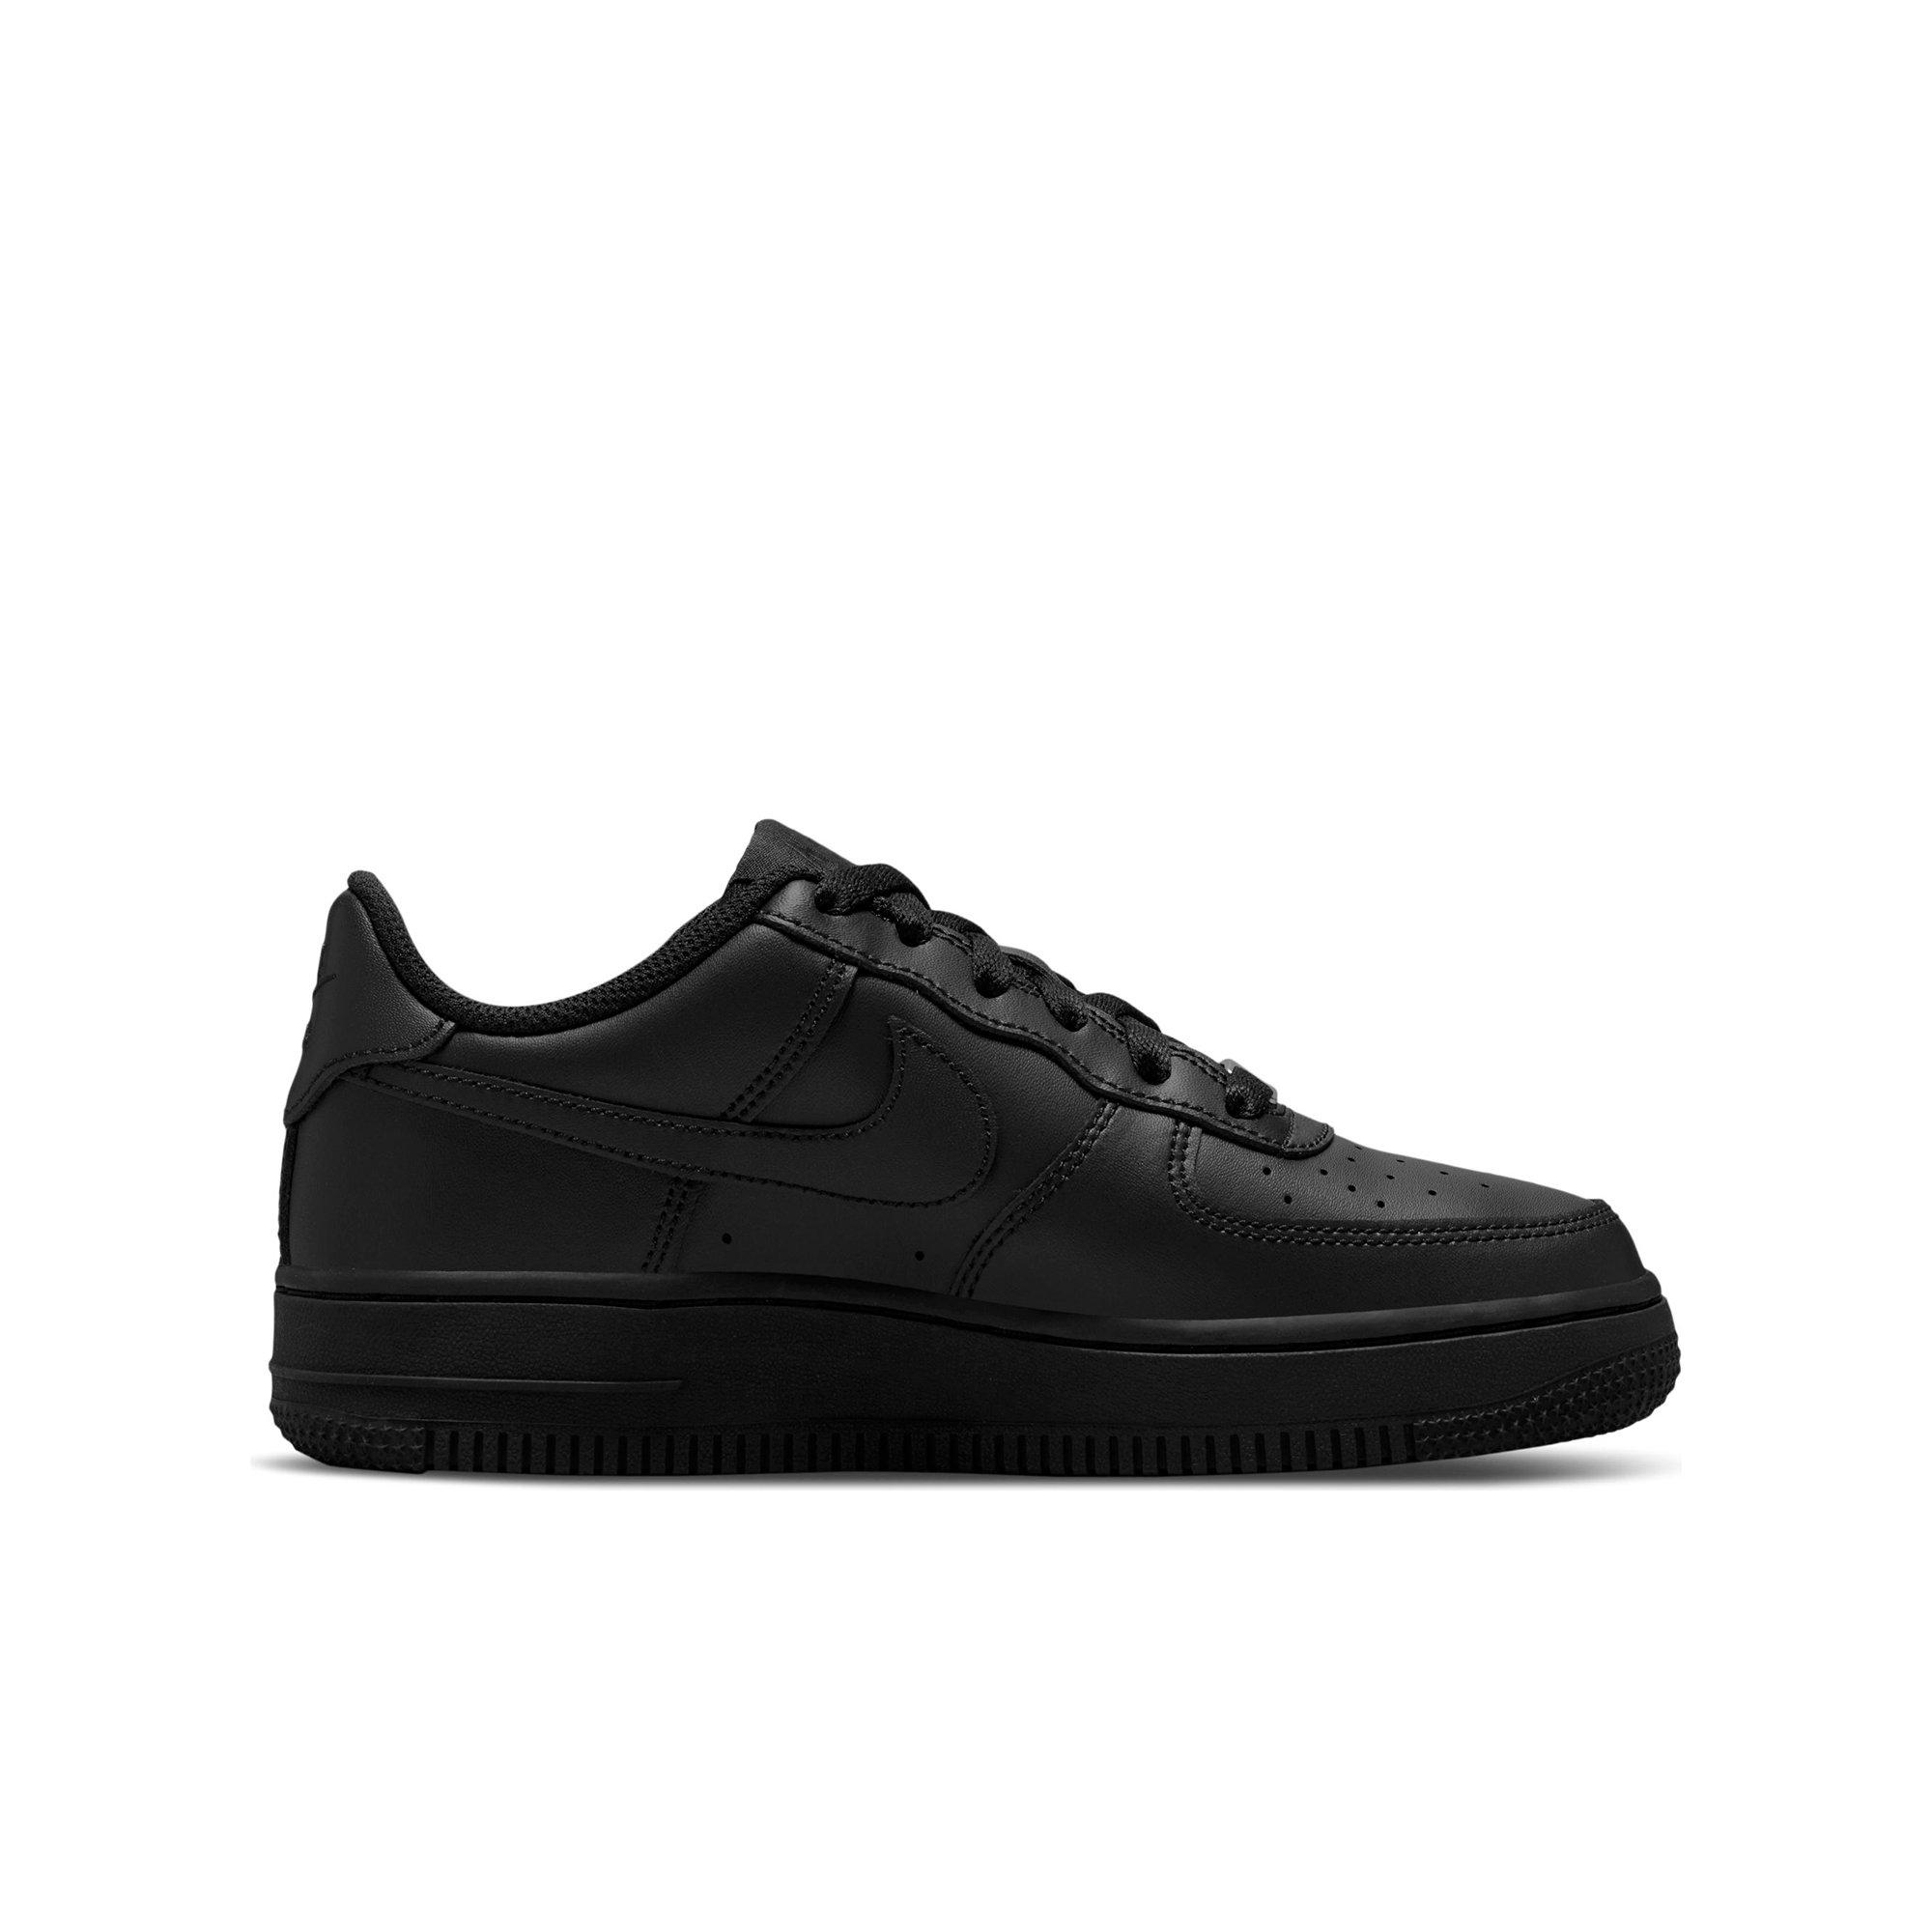 Nike Kids Air Force 1 LE Baby / Toddler Black Shoes Sneakers Size